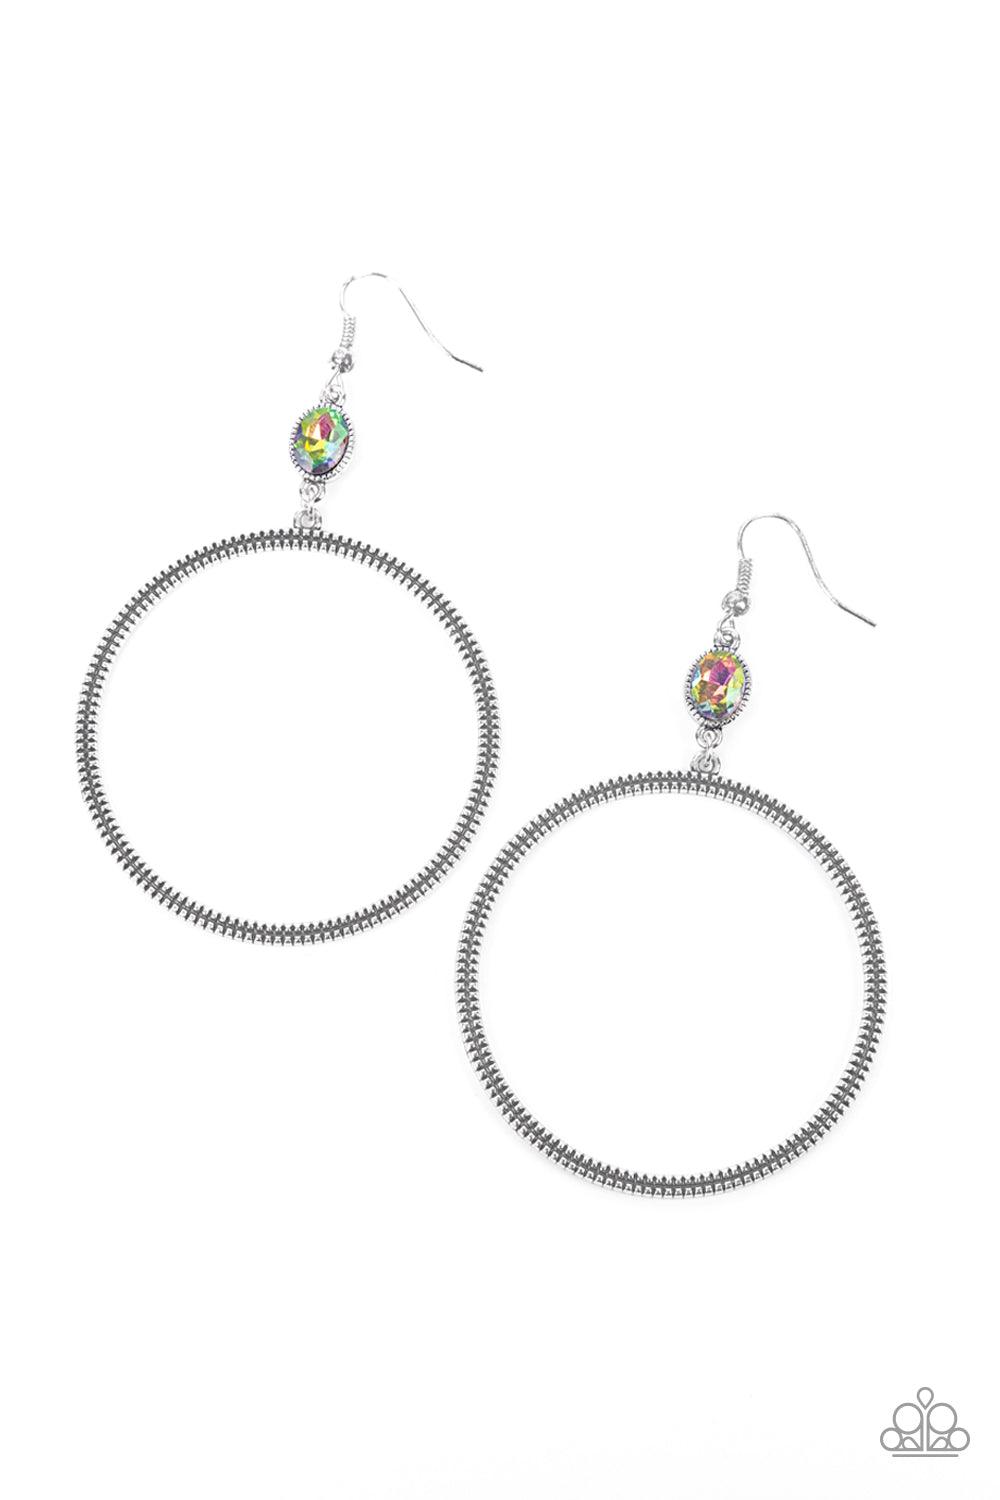 Paparazzi Accessories Work That Circuit - Multi A slim oversized silver ring, highlighted by two concentric circles of dotted texture, dangles from an oval oil spill gem for an edgy refined look. Earring attaches to a standard fishhook fitting. Sold as on